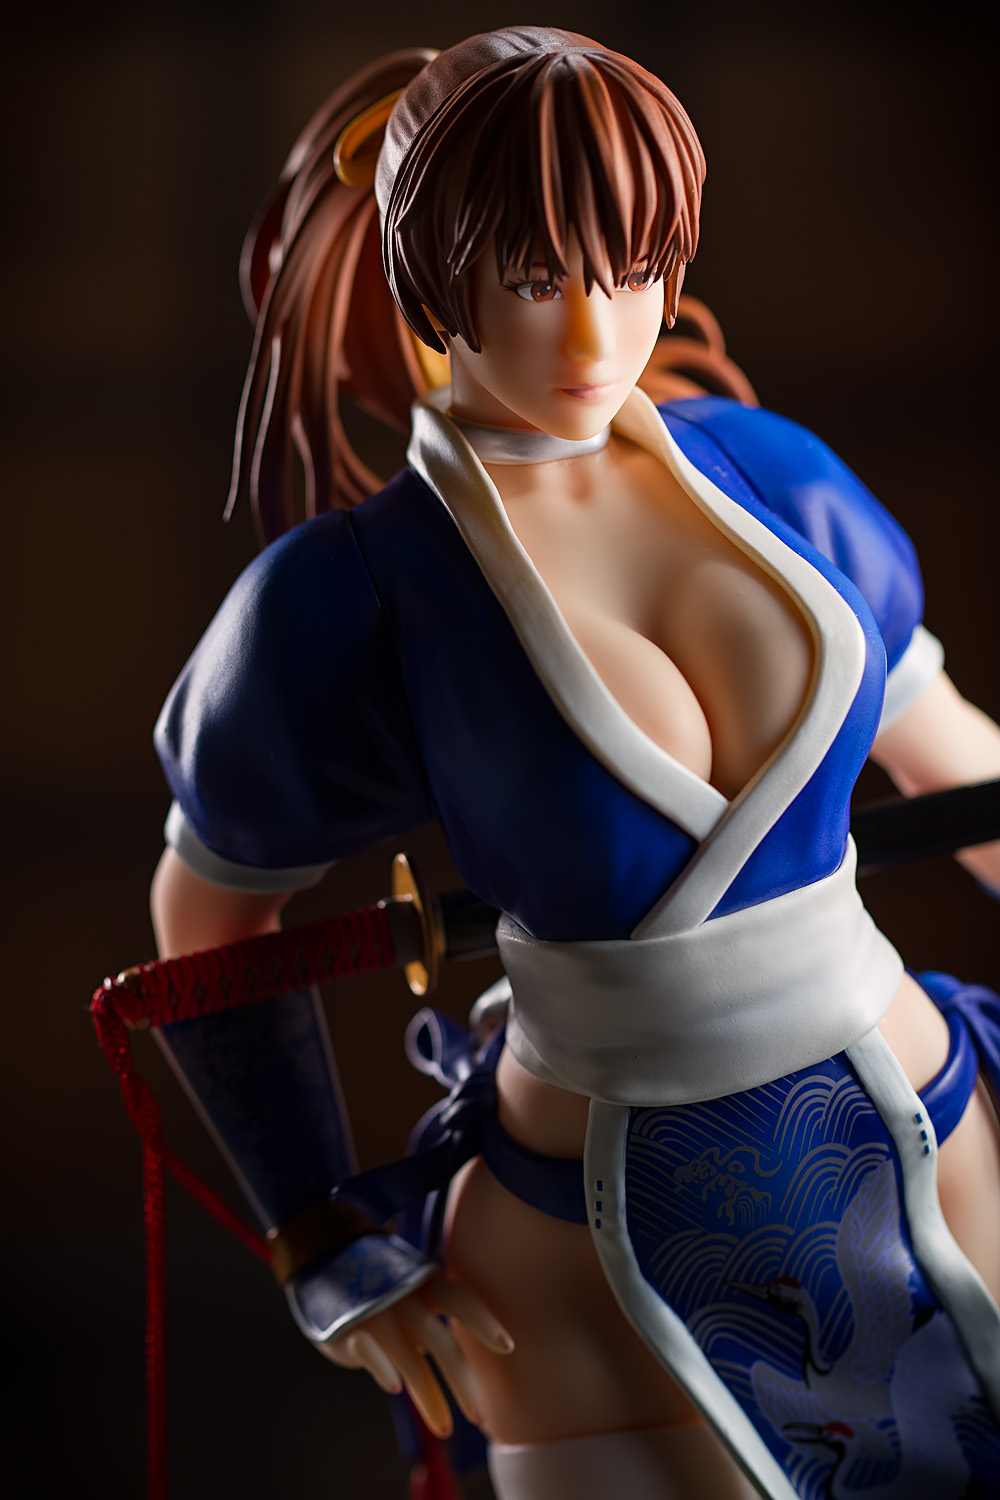 Kasumi from Dead or Alive 5.